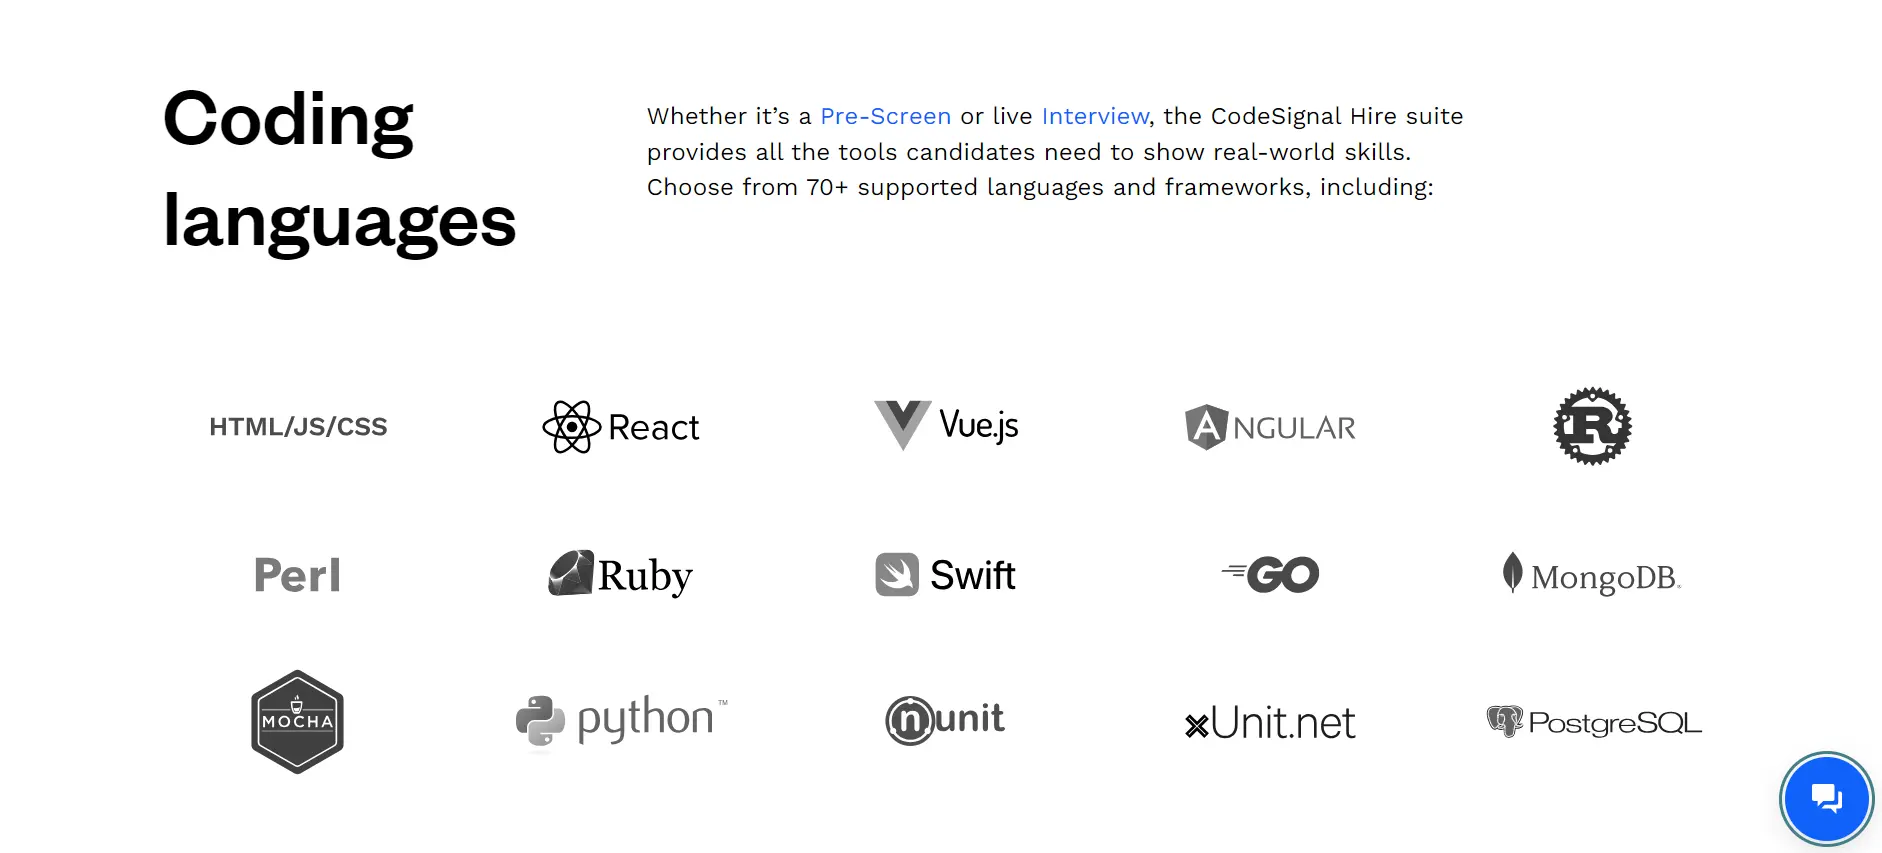 A screenshot of CodeSignal’s website, showing some of the programming languages companies can test